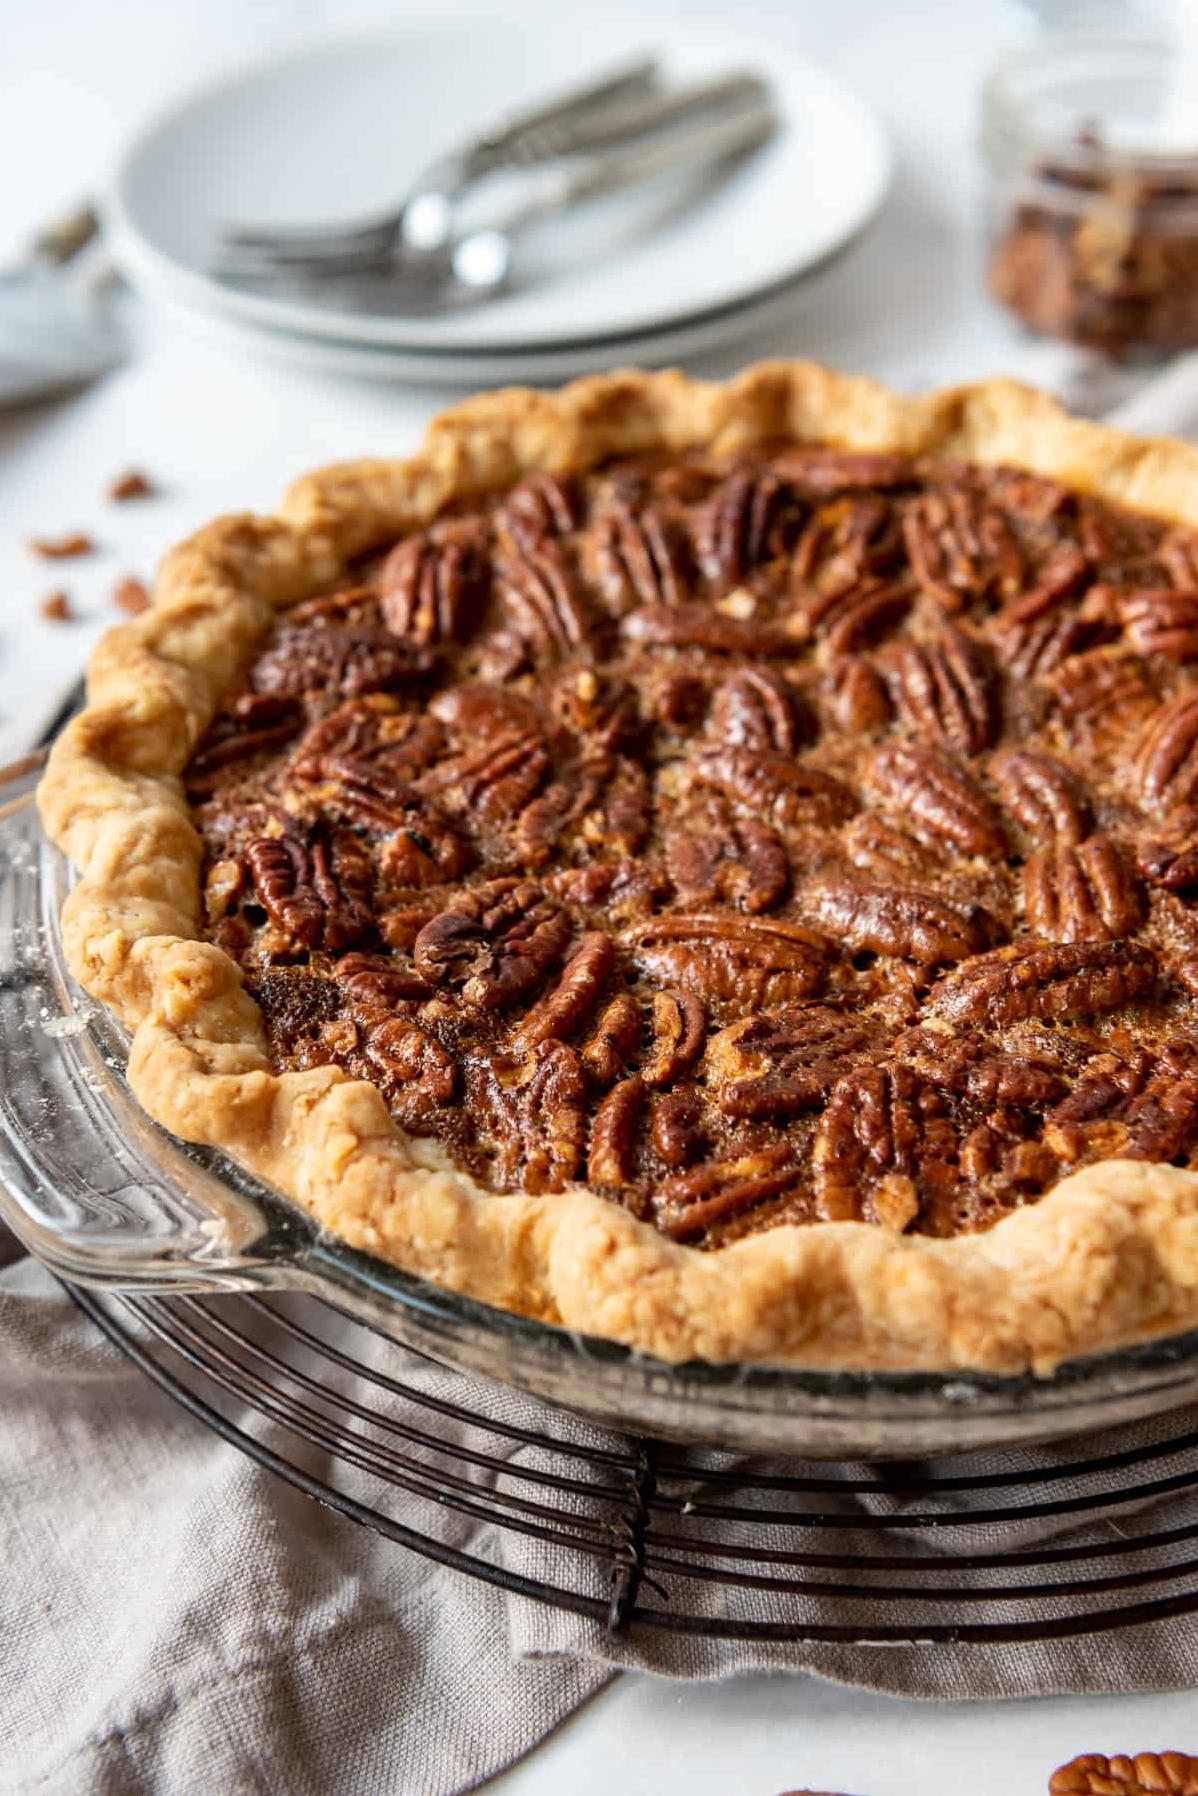  A classic Southern dessert, pecan pie is comfort food at its finest.